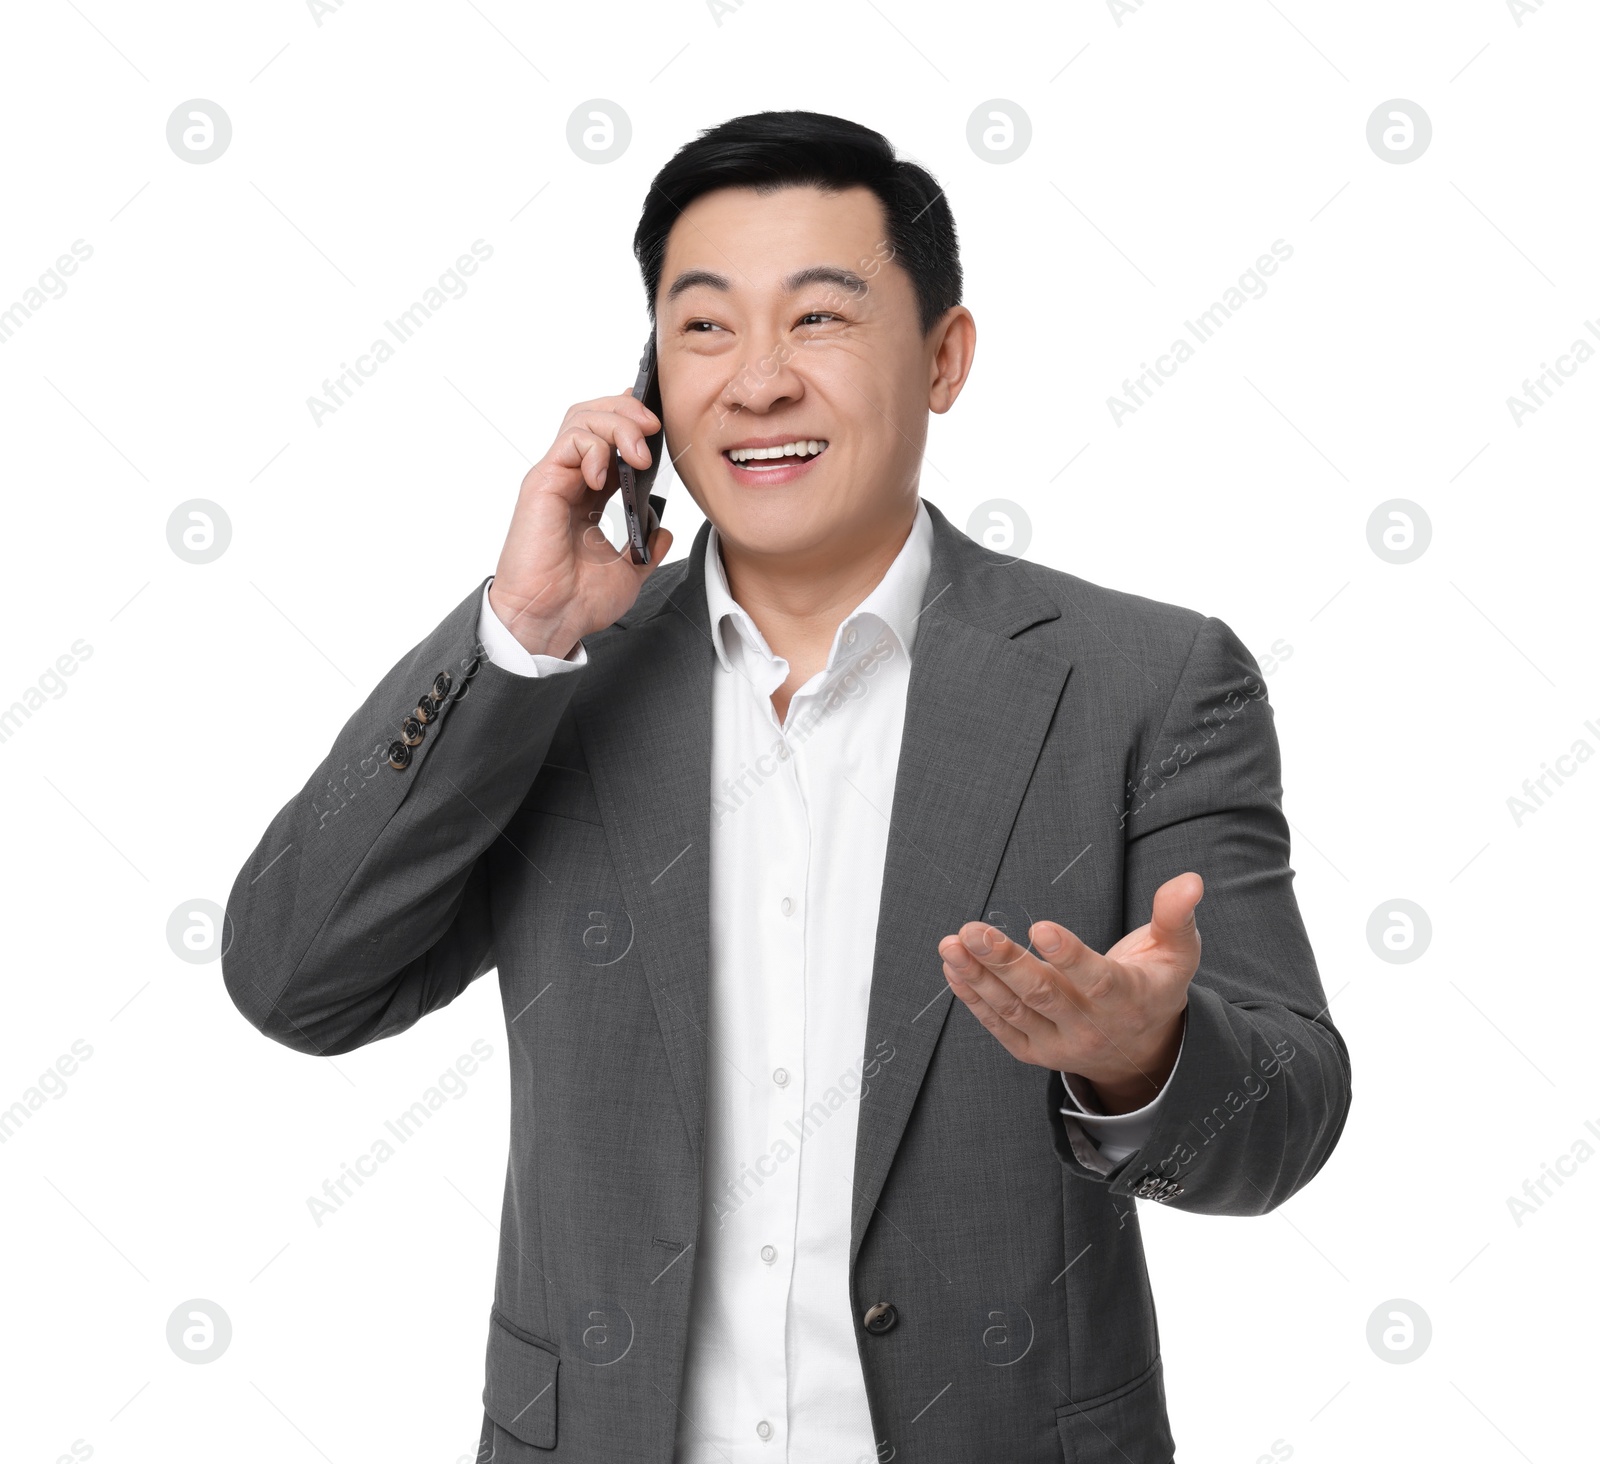 Photo of Businessman in suit talking on phone against white background